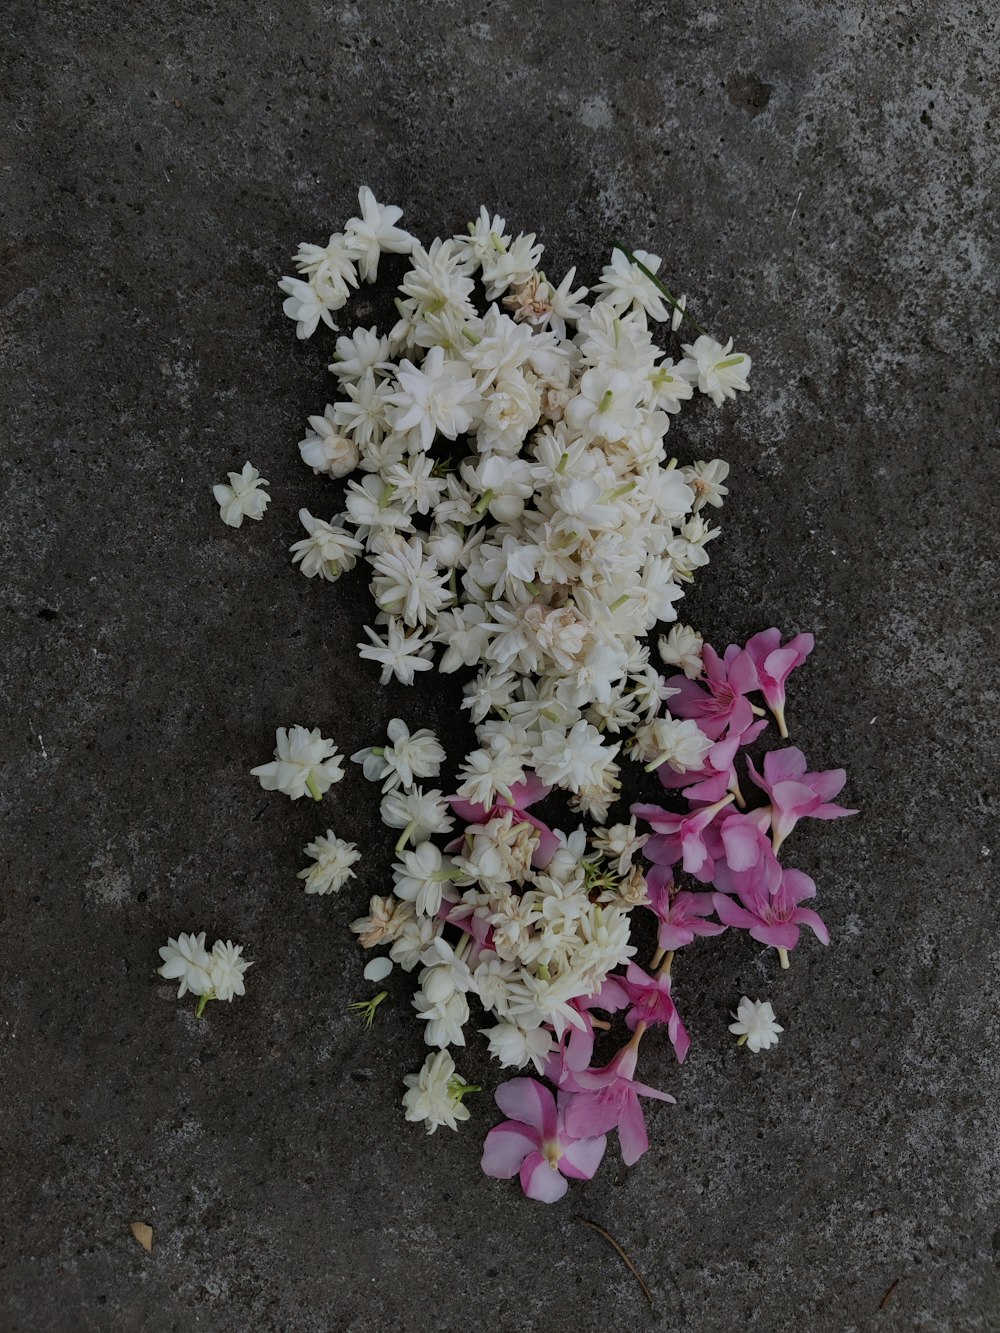 a bunch of white and pink flowers laying on the ground